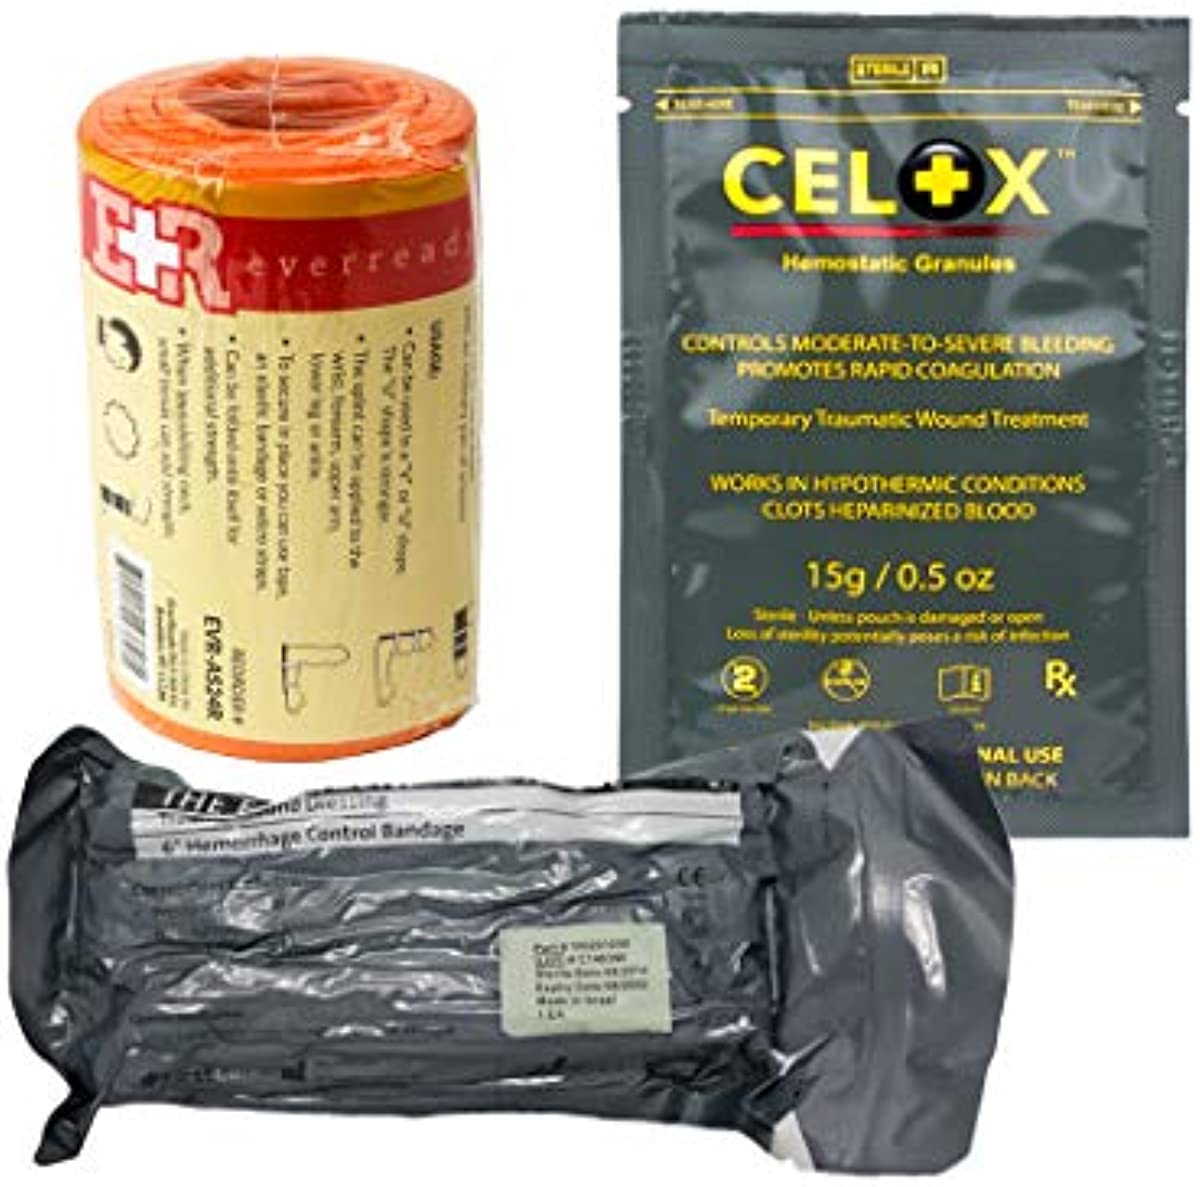 Ever Ready First Aid Combo Pack with Israeli Bandage, Celox Hemostatic Granules and Universal Aluminum Splint